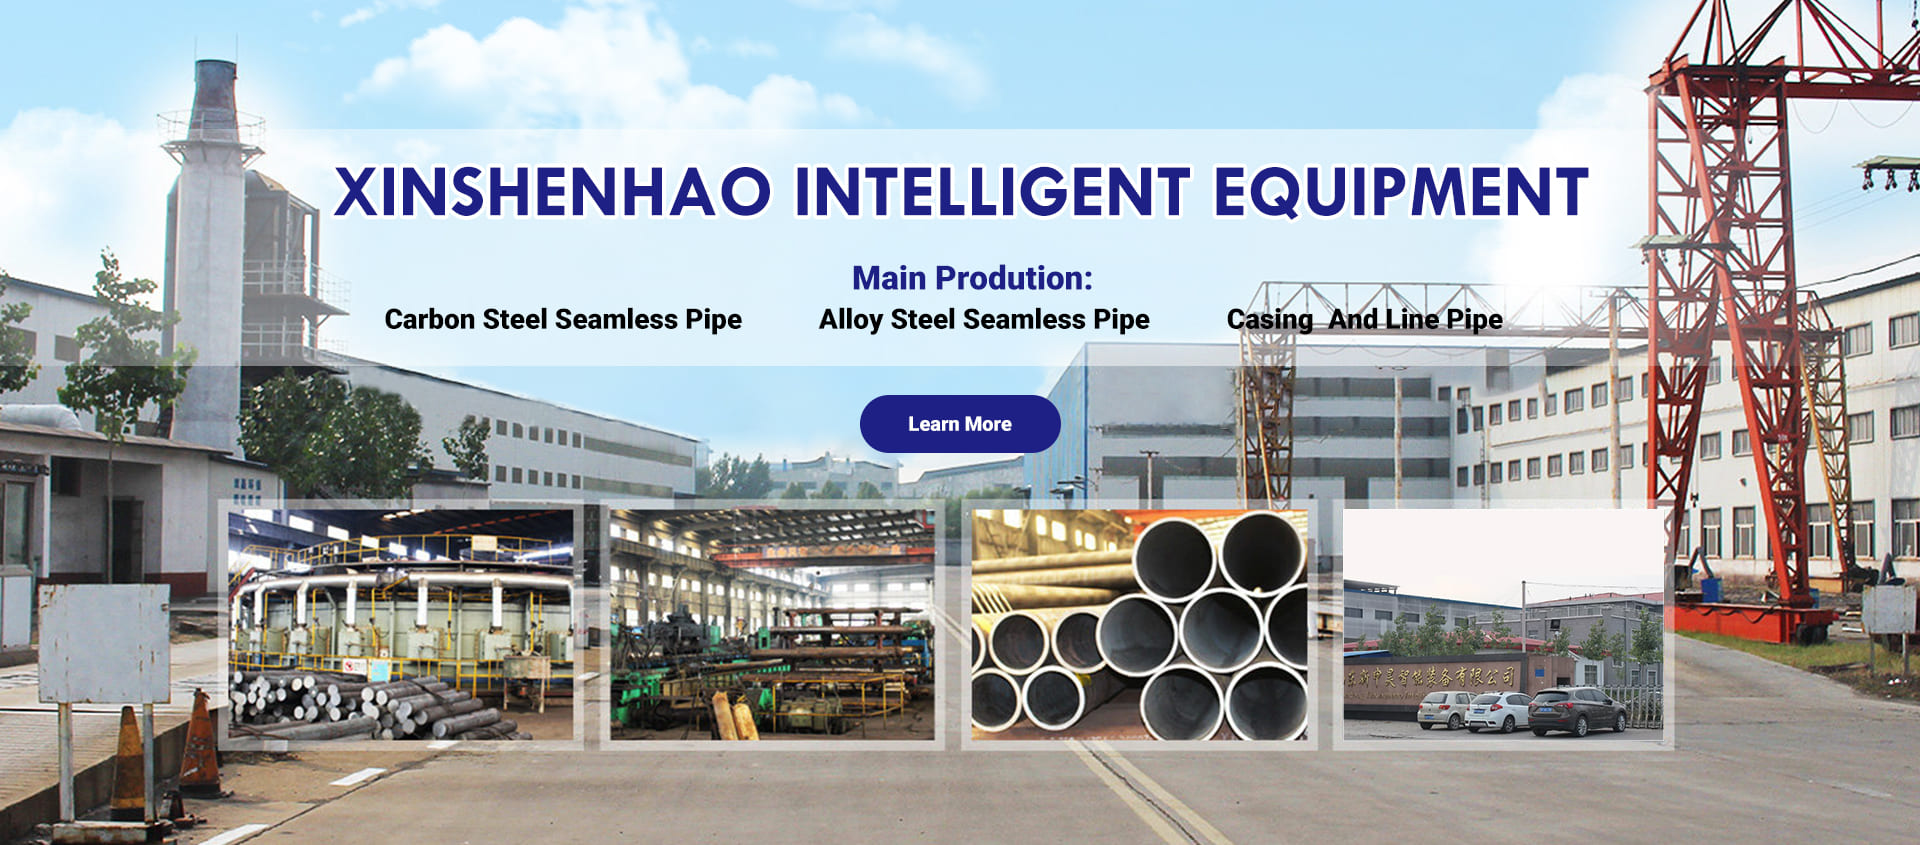 10 Inch Casing Pipe Price, 2 Inch Carbon Steel Pipe, 4 Inch Casing Pipe Price - Xinshenhao